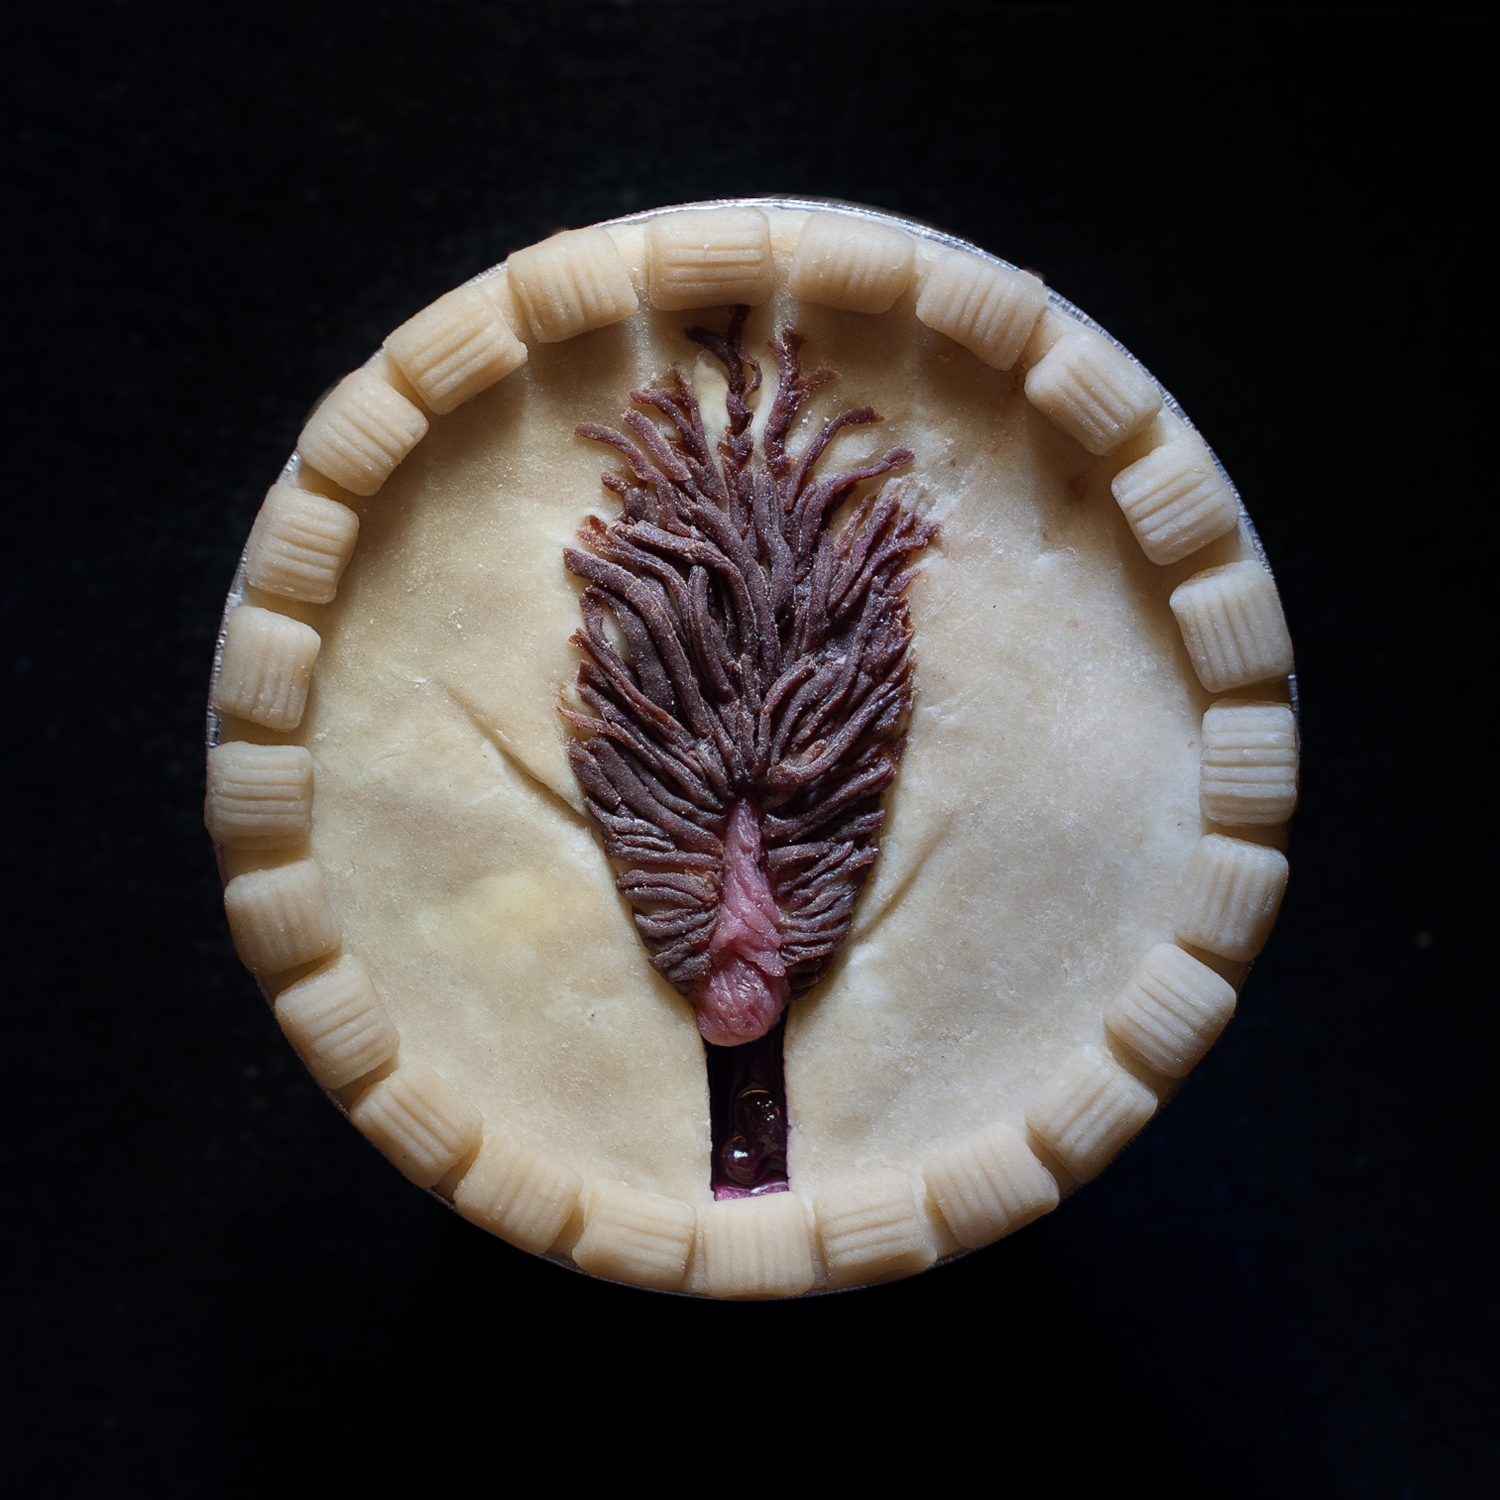 Unbaked cherry berry berry pie with a pie crust art that looks like a realistic vulva with brown pubic hair.